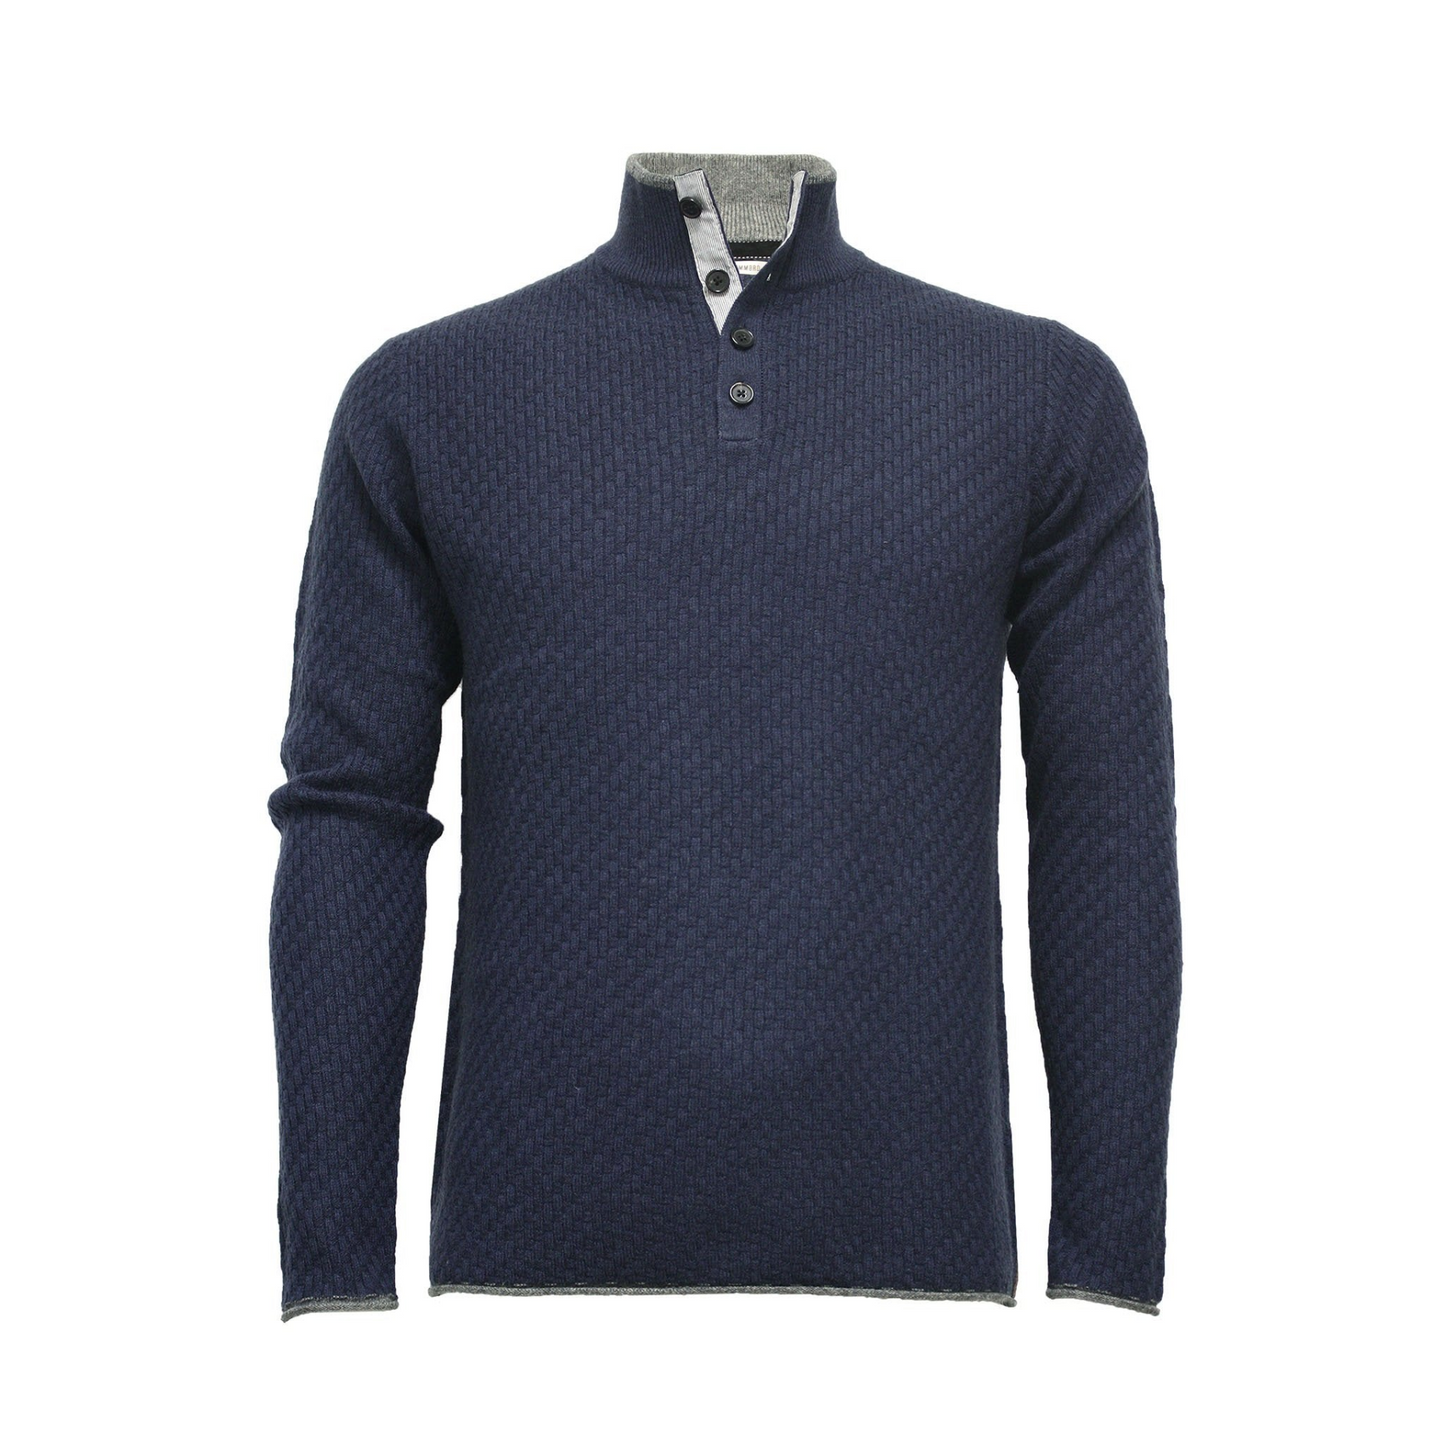 Cashmere Sweater Button Neck Andromeda in Carbon Stitch Rockpool Blue